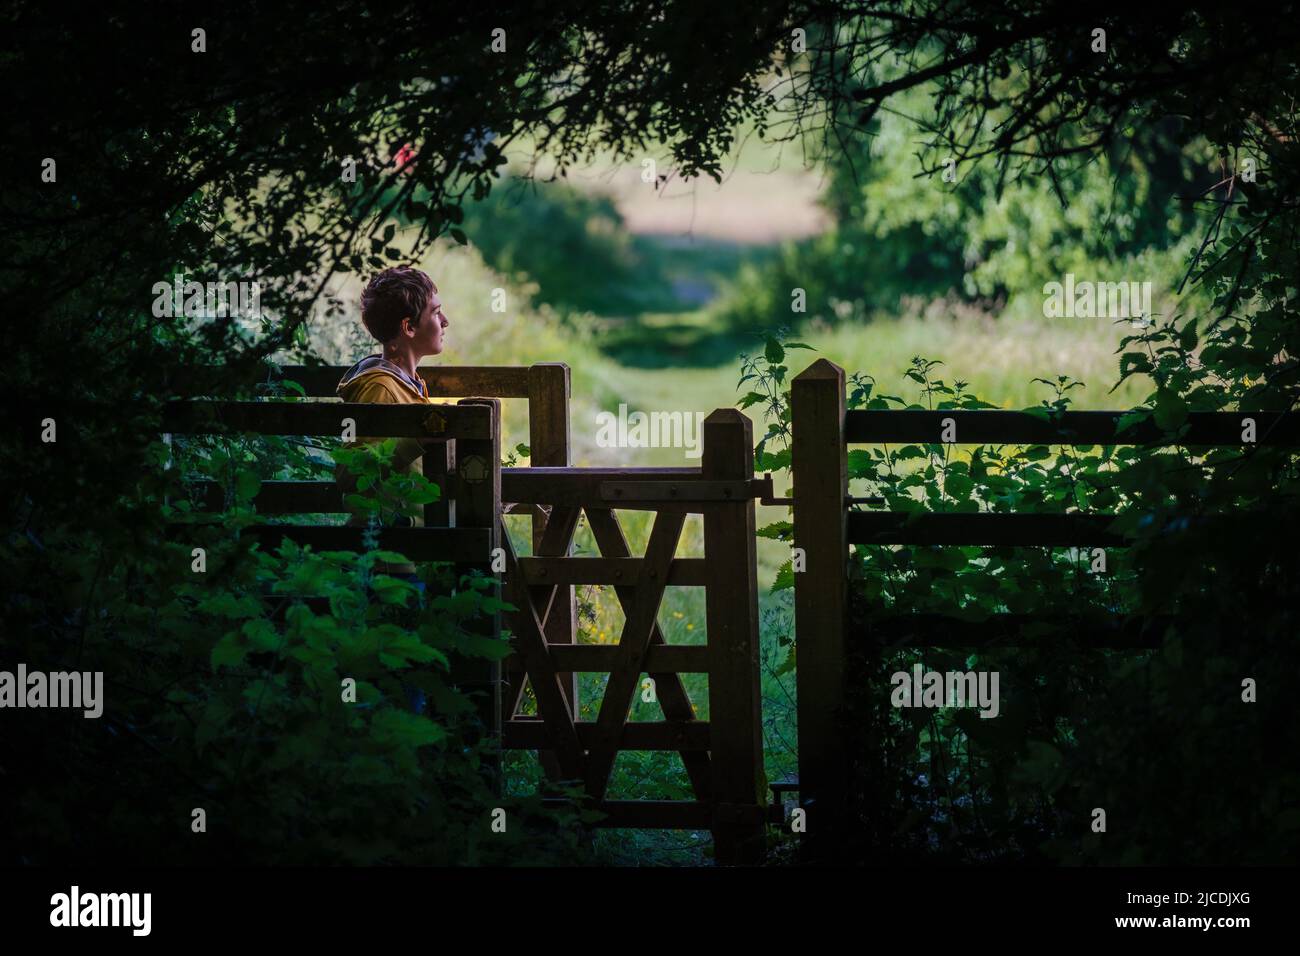 A child going into the countryside Stock Photo